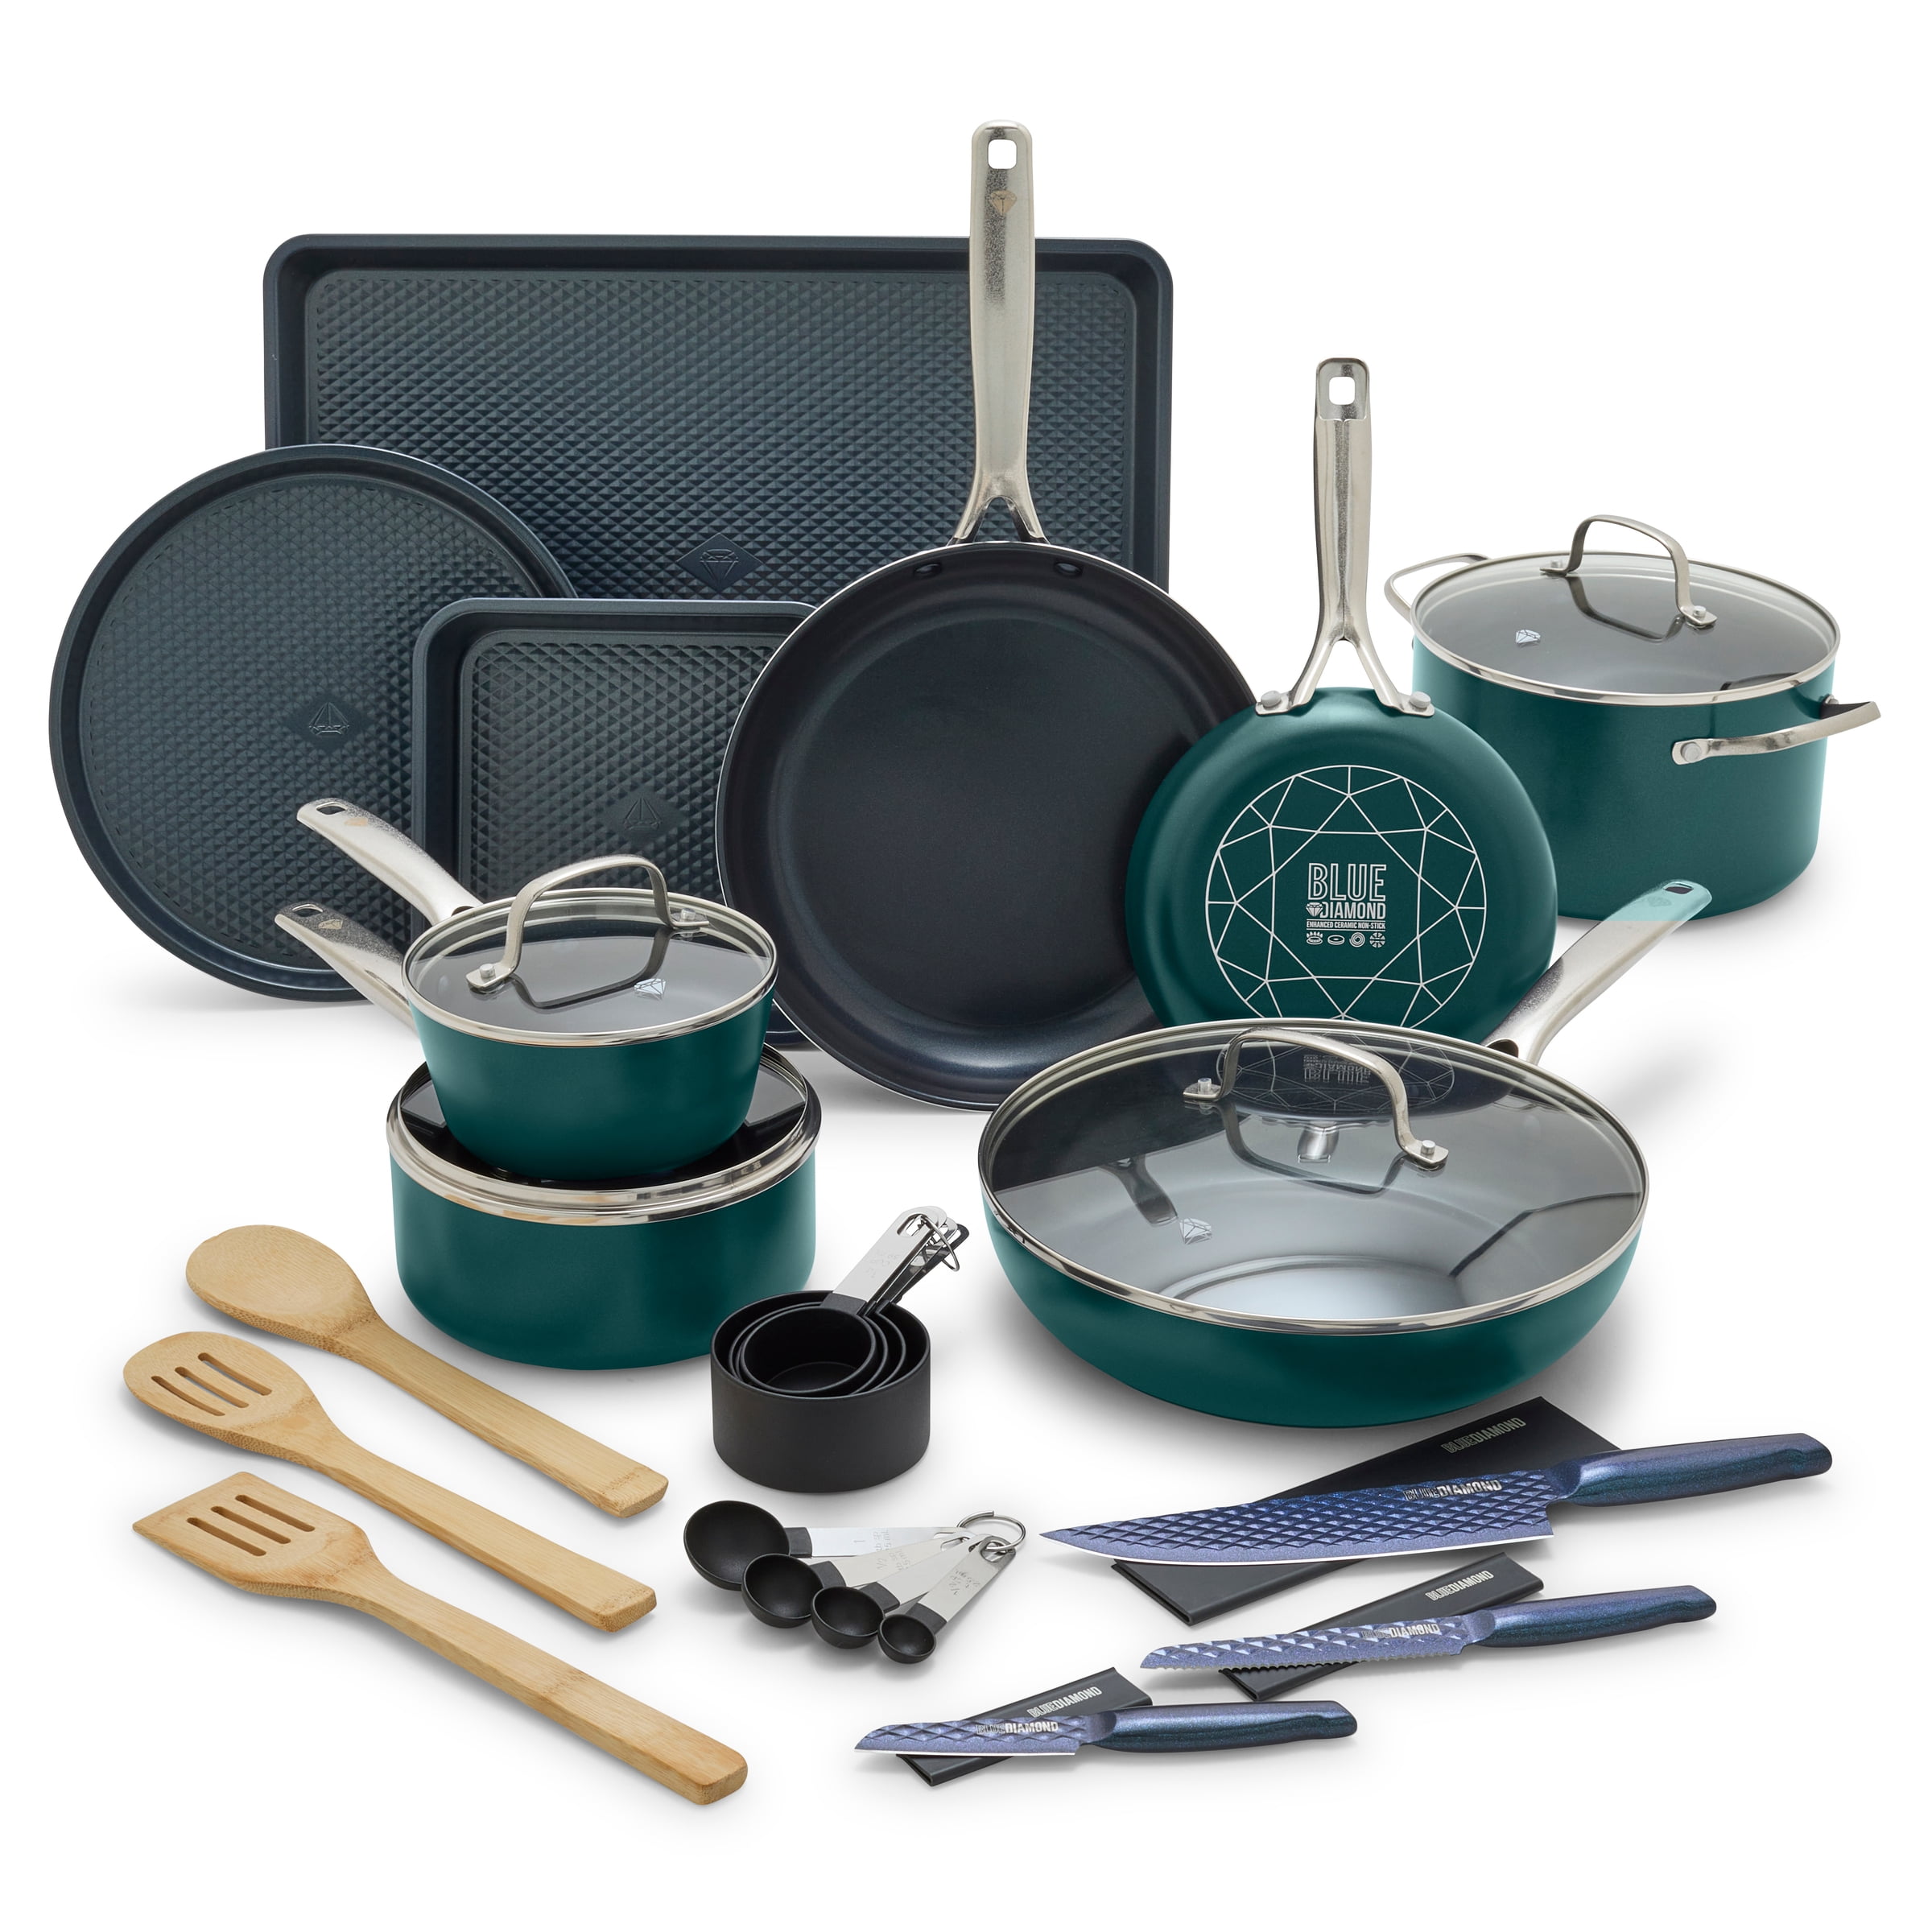  Pots and Pans Set Ultra Nonstick, Pre-assembled 7 Piece Ceramic  Cookware Sets, Non Toxic Pots and Pans, Stay Cool Handle & Bamboo Kitchen  Utensils, Gas/Induction Compatible, 100% PFOA Free, Turquoise: Home